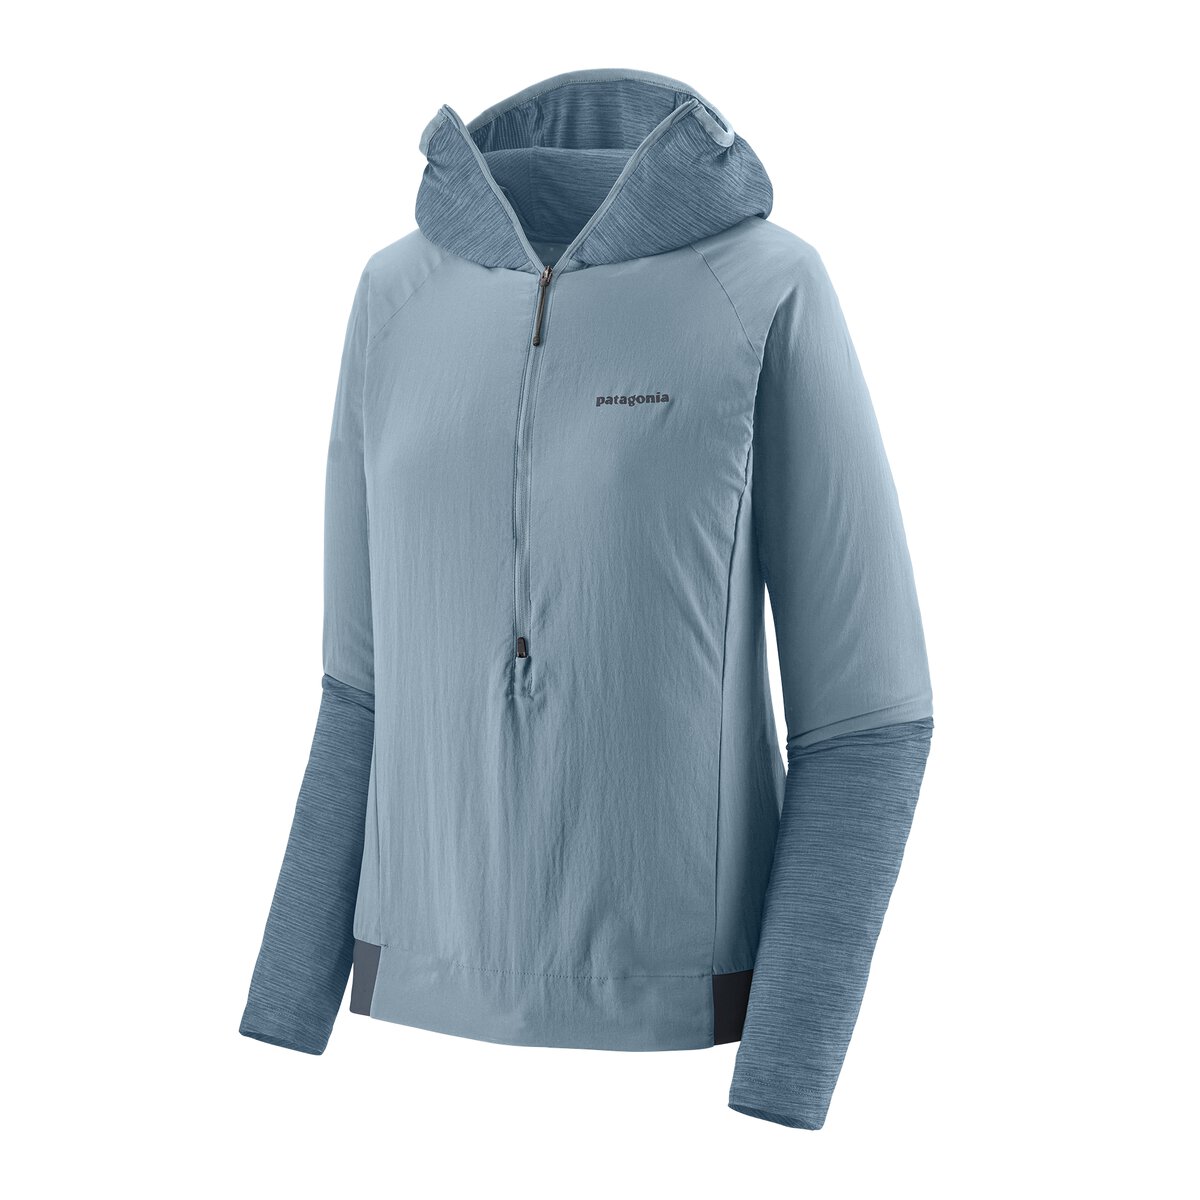 Patagonia, Airshed Pro Pullover, Women's, Steam Blue